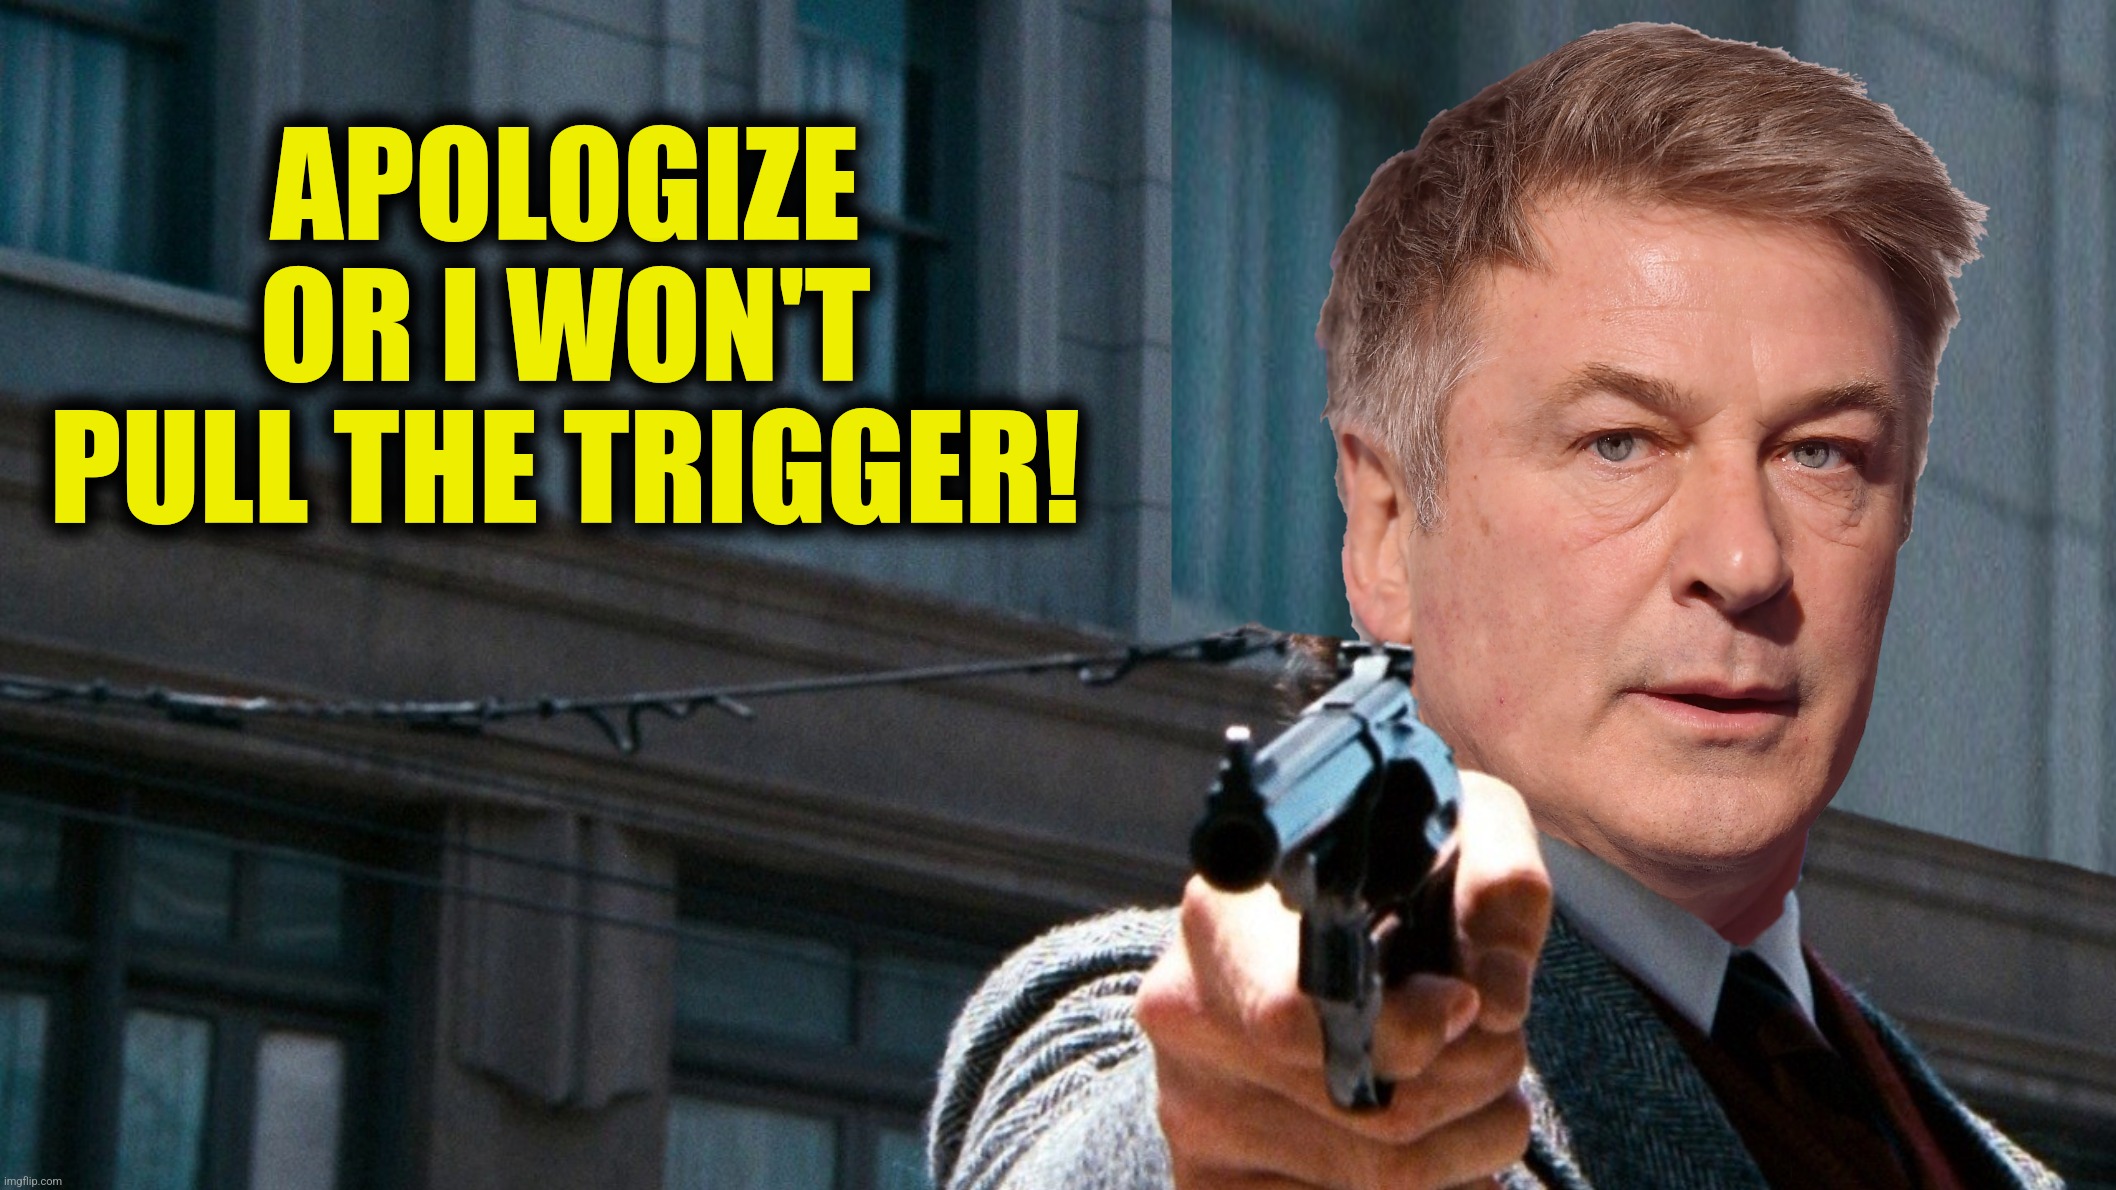 APOLOGIZE OR I WON'T PULL THE TRIGGER! | made w/ Imgflip meme maker